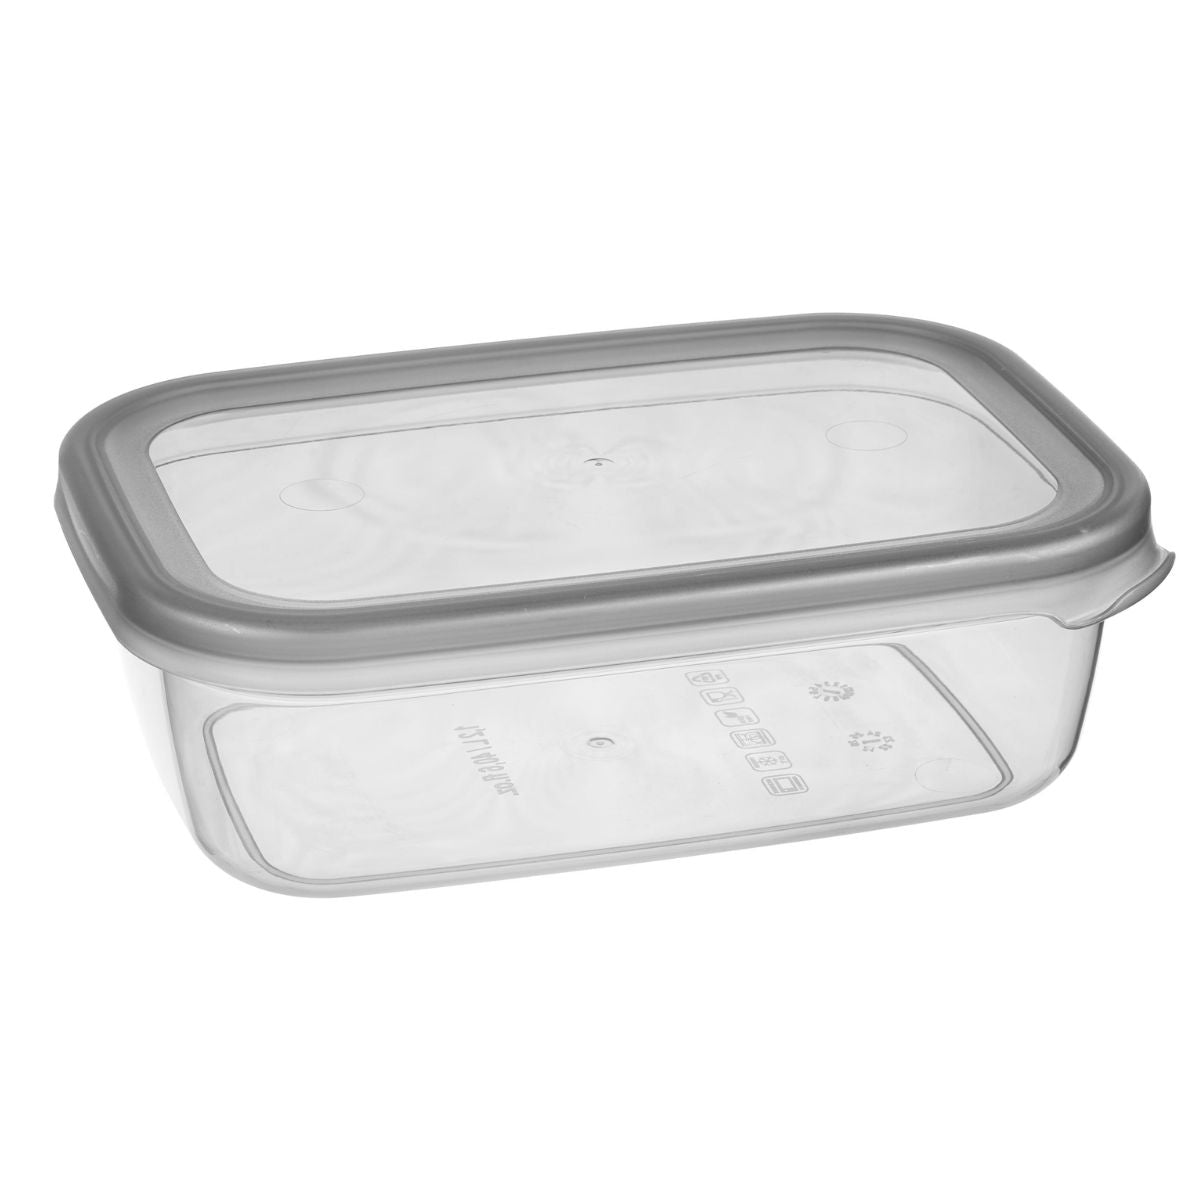 A Foly - Storage Box - 1200ml with a lid on a white background.